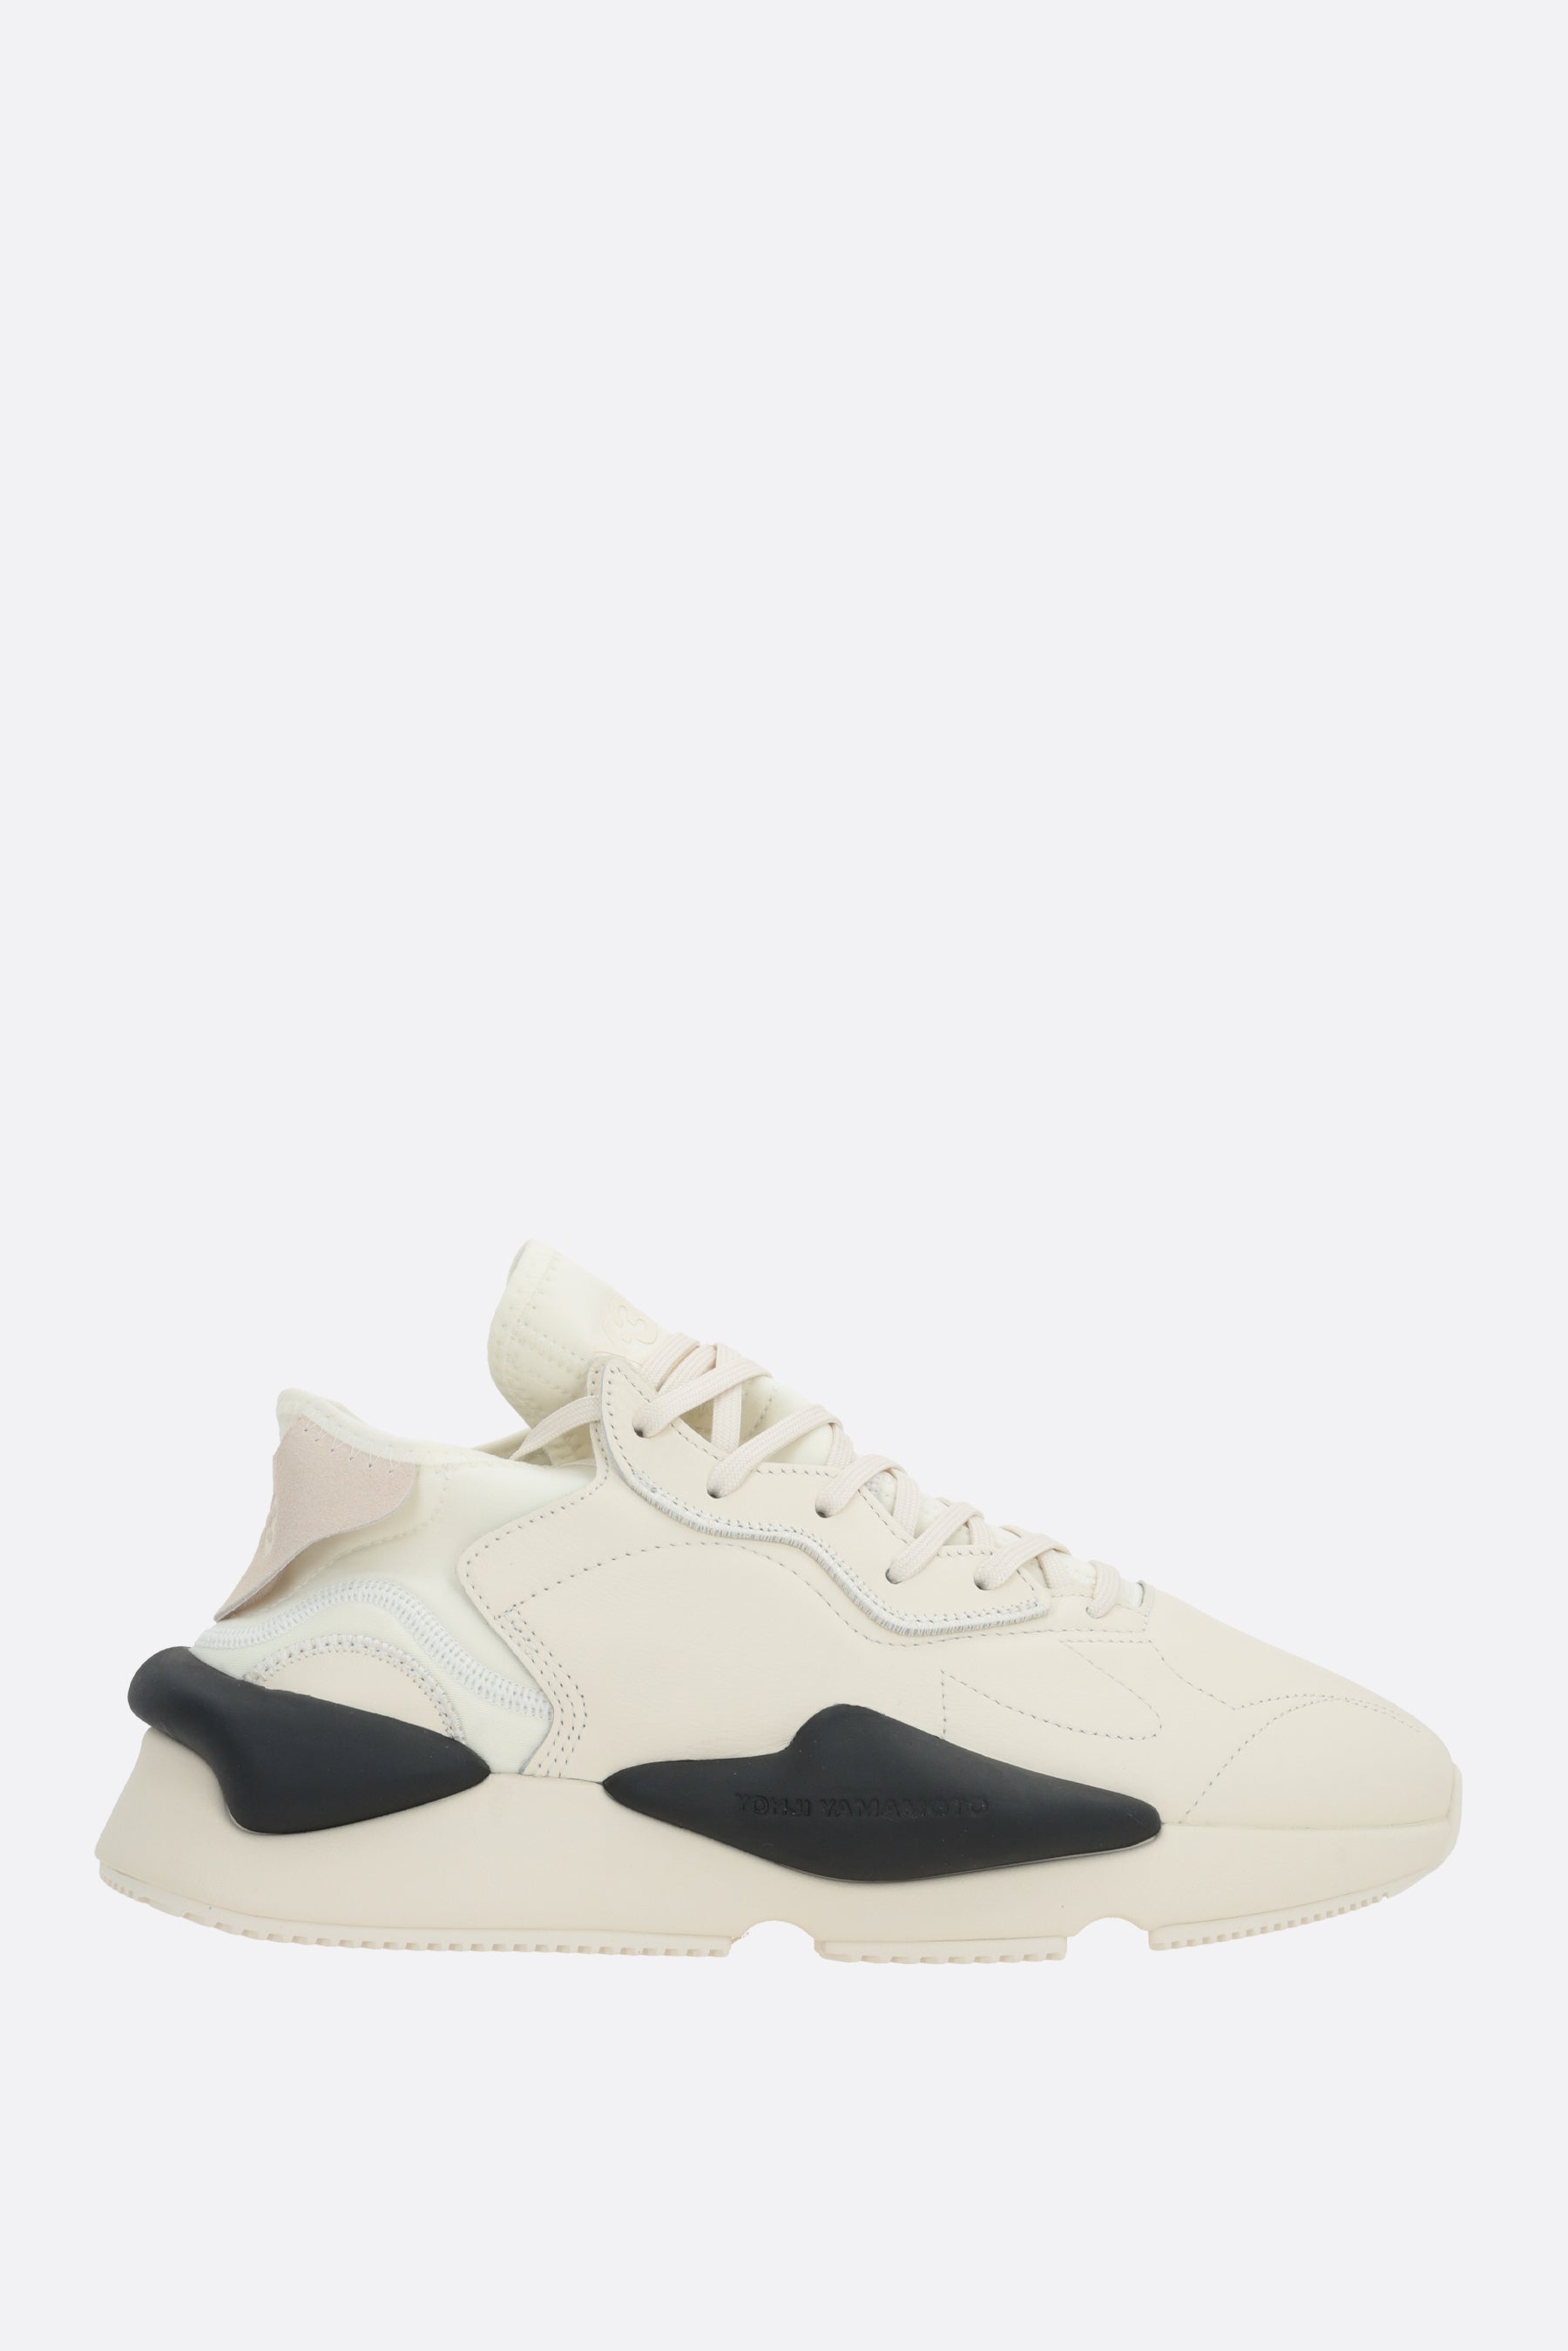 Y-3 Kaiwa smooth leather and neoprene sneakers